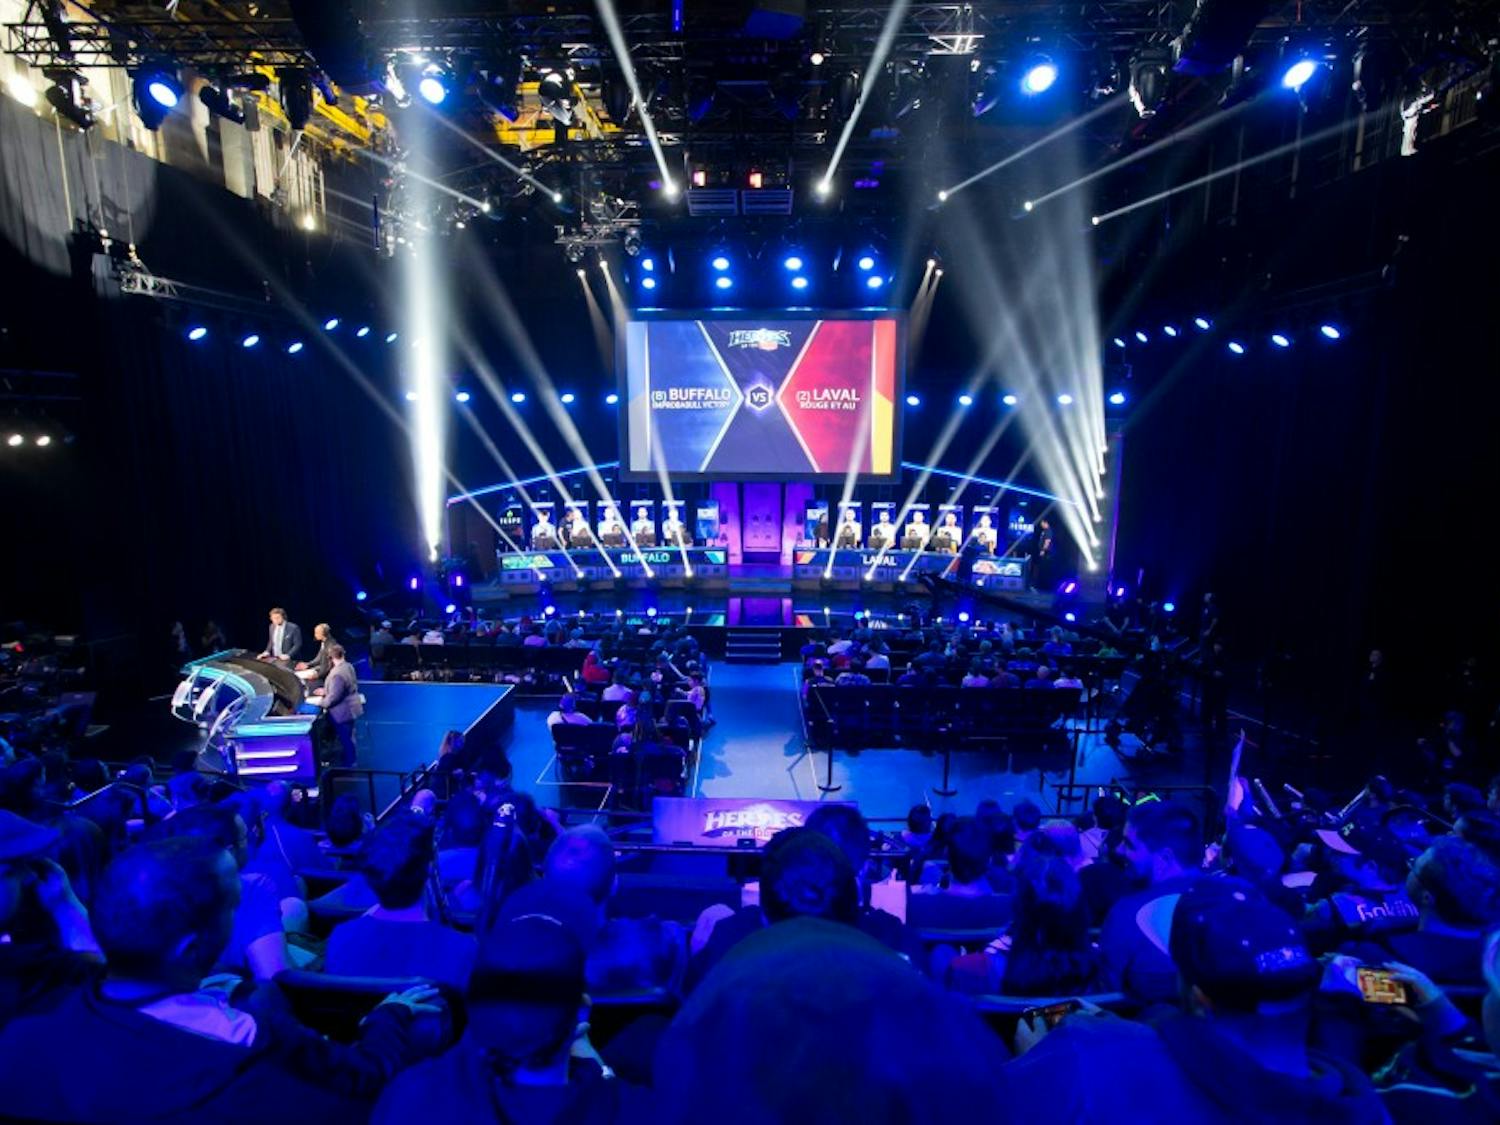 UB lost in the Heroes of the Dorm Grand Finals to Université Laval 0-3 Saturday evening. The team battled its way to the final round at Blizzard Arena in Burbank, California after advancing through a bracket of 64 teams. More than 300 teams competed to enter the bracket.